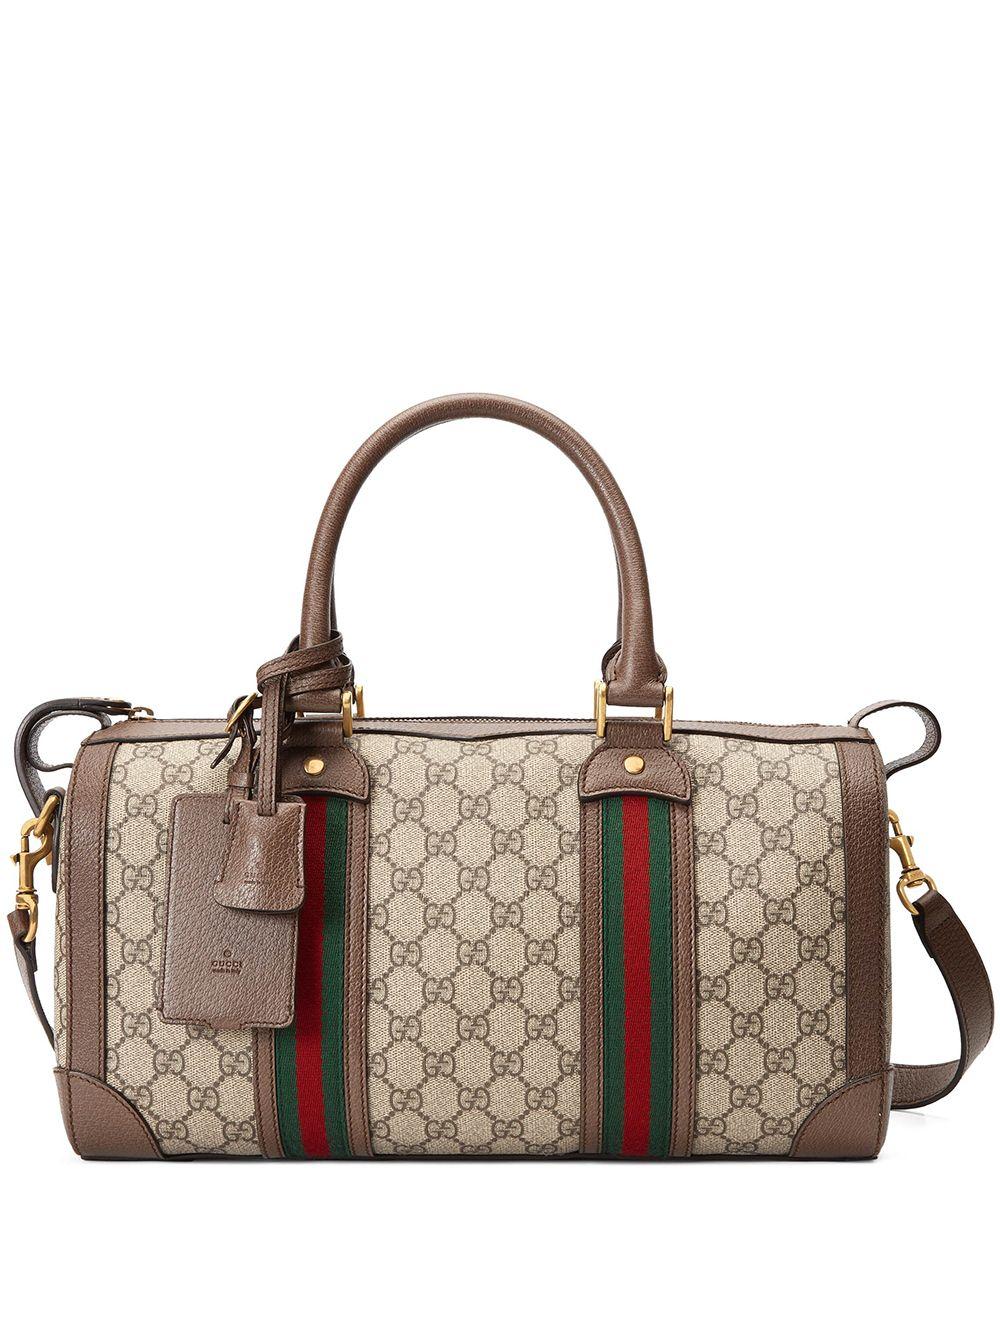 Gucci Small Ophidia GG Web Duffle Bag in Brown for Men